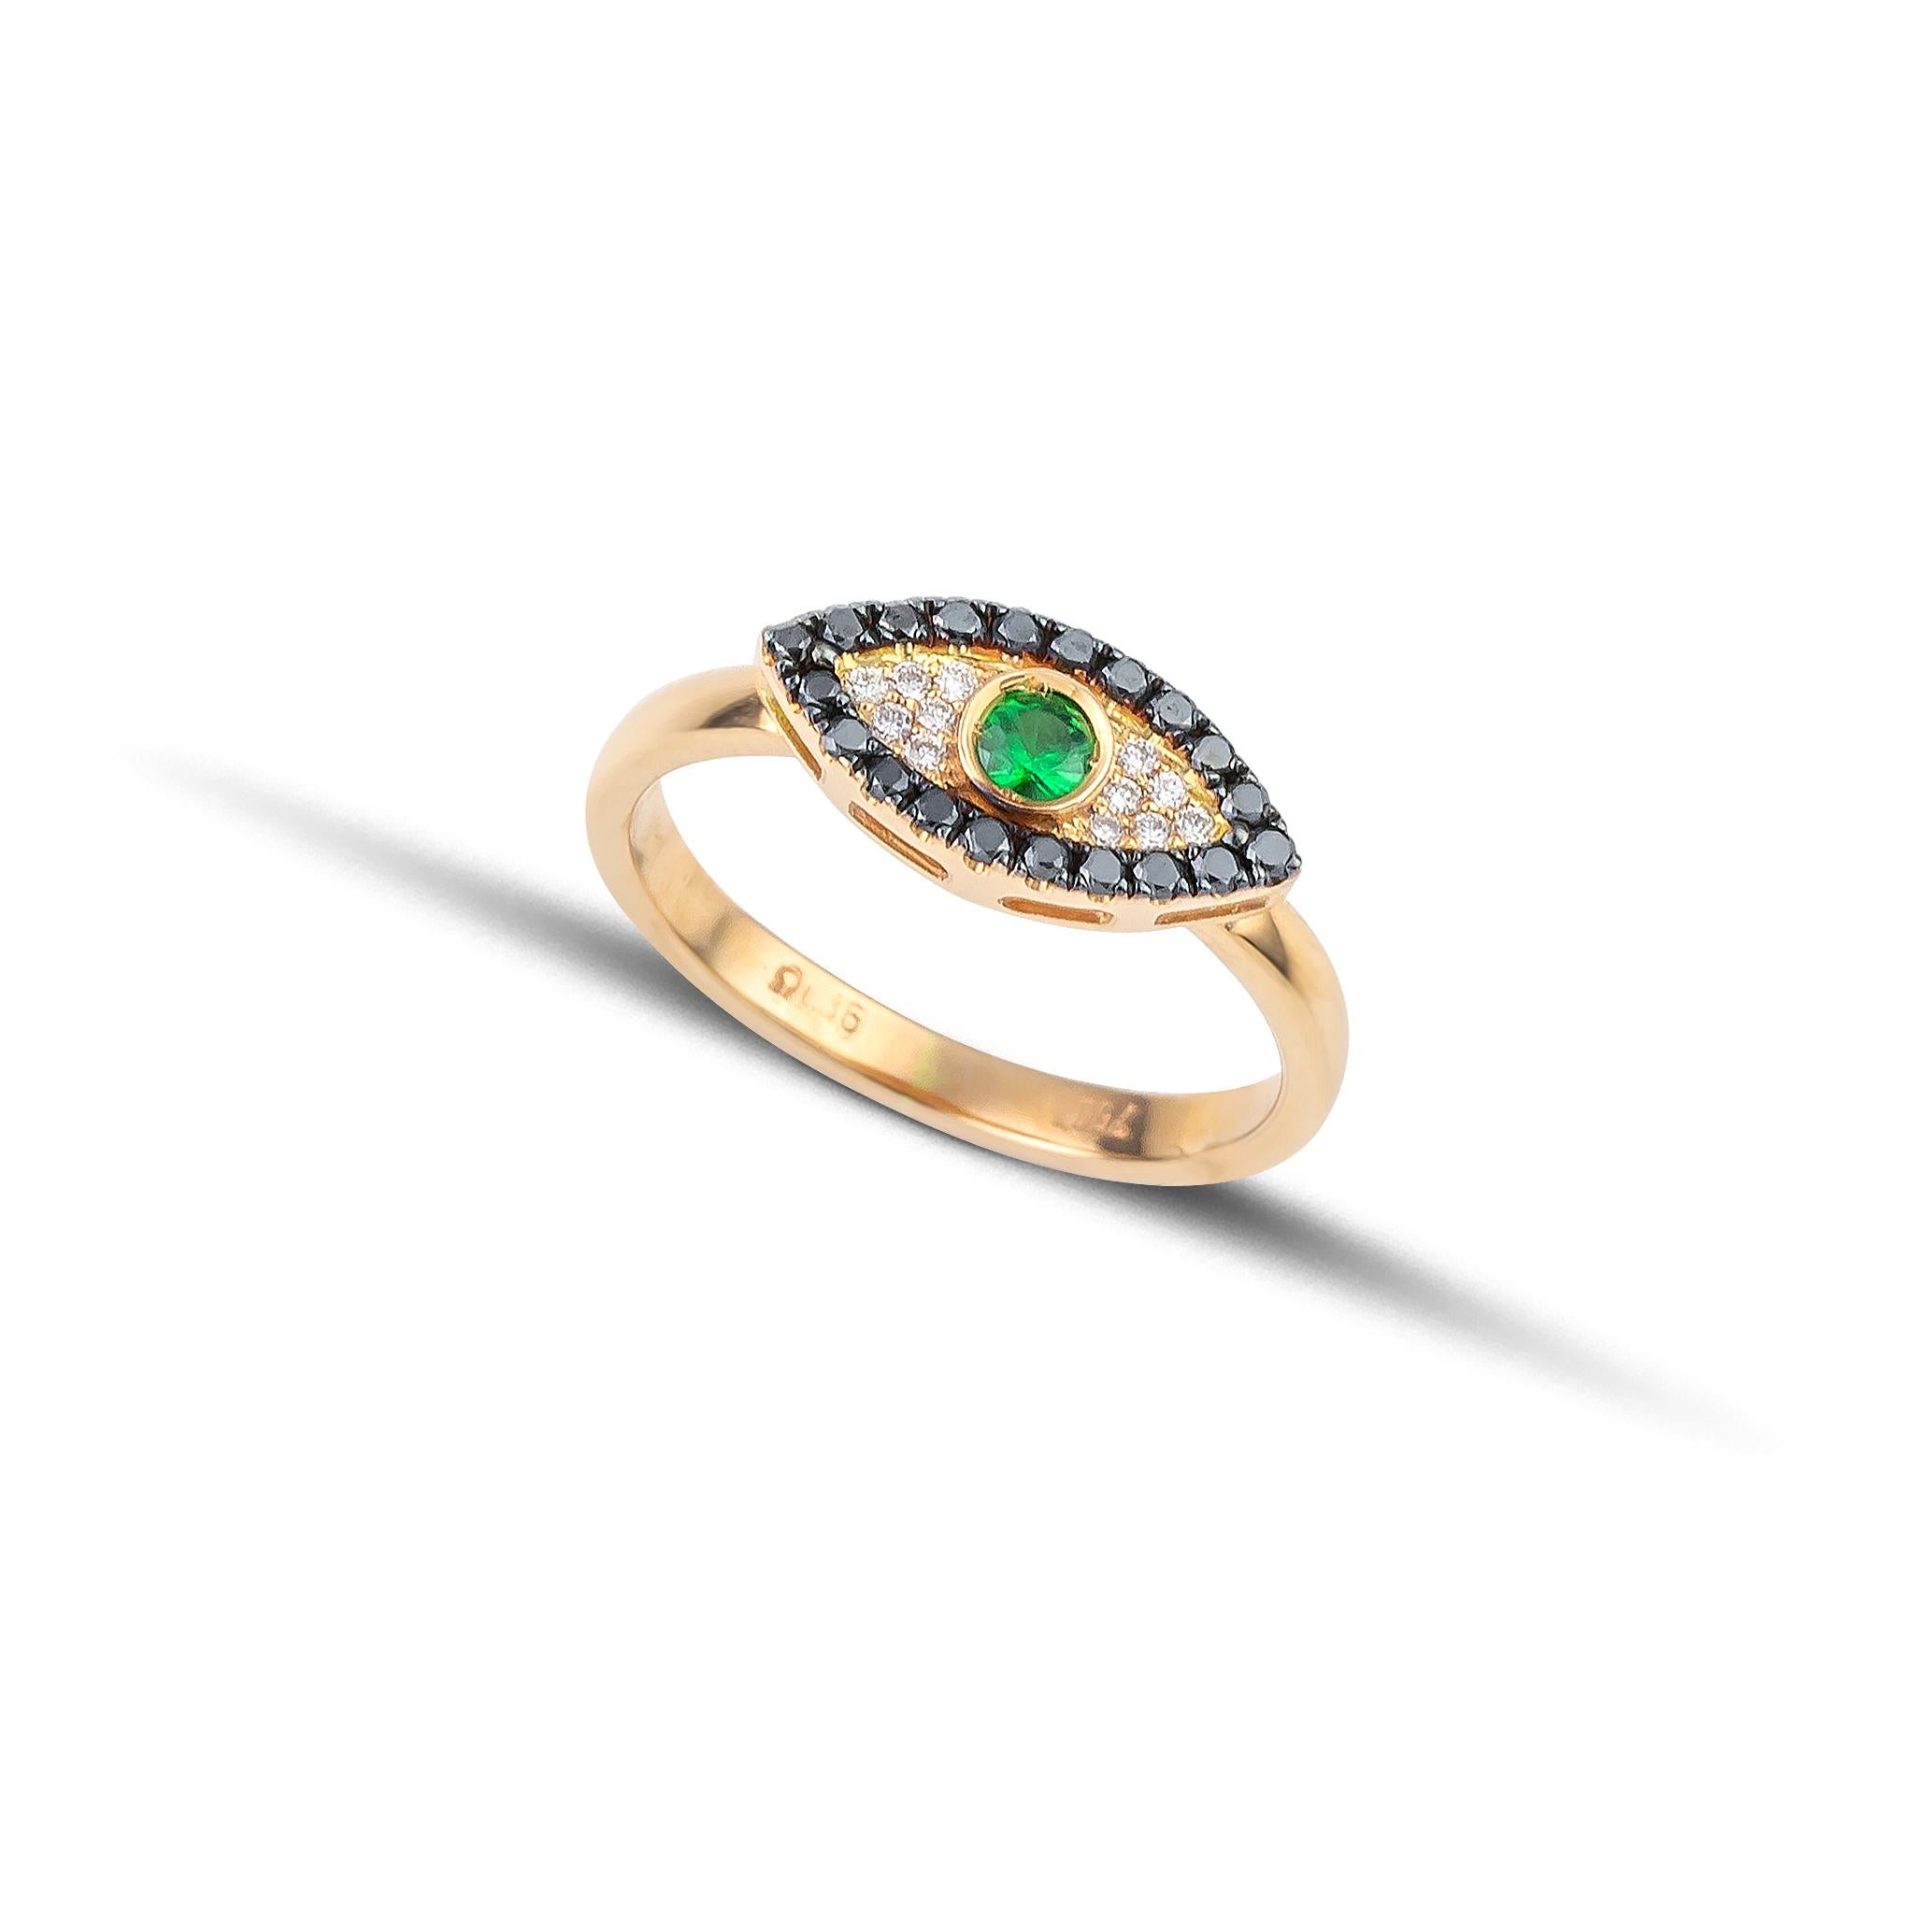 Evil Eye Ring with pave white and black brilliant cut diamonds and a central green Tsavorite, handcrafted in 18Kt yellow gold. In the greek culture the evil eye protects the one who wears it from the negative energy and stops the bad thoughts from